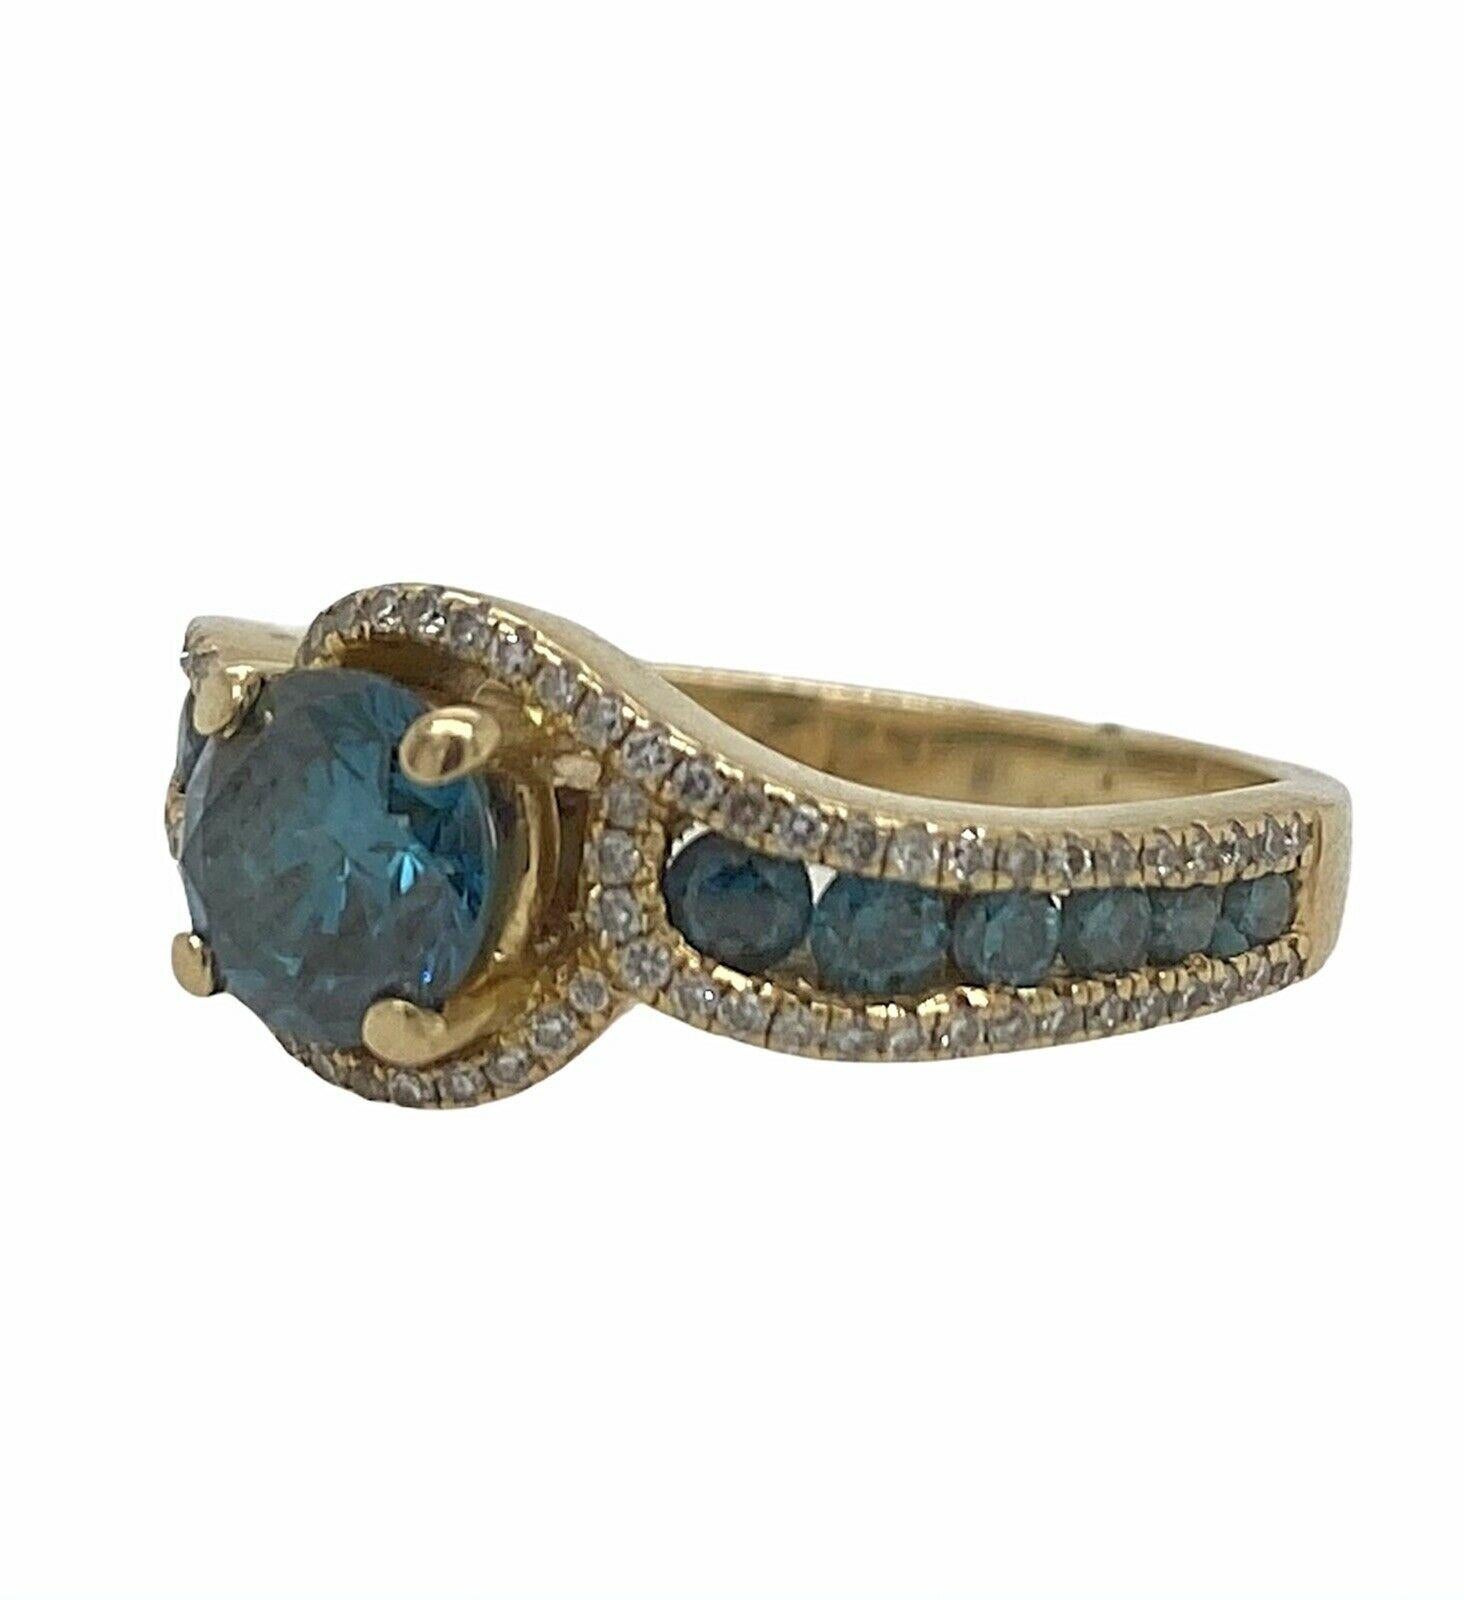 Excellent condition. This solid 14K yellow gold ring features a round blue diamond in the center weighing approximately 0.70ct and SI clarity. There are an additional 12 accent blue diamonds that taper on each side and weigh approximately 0.25cttw.